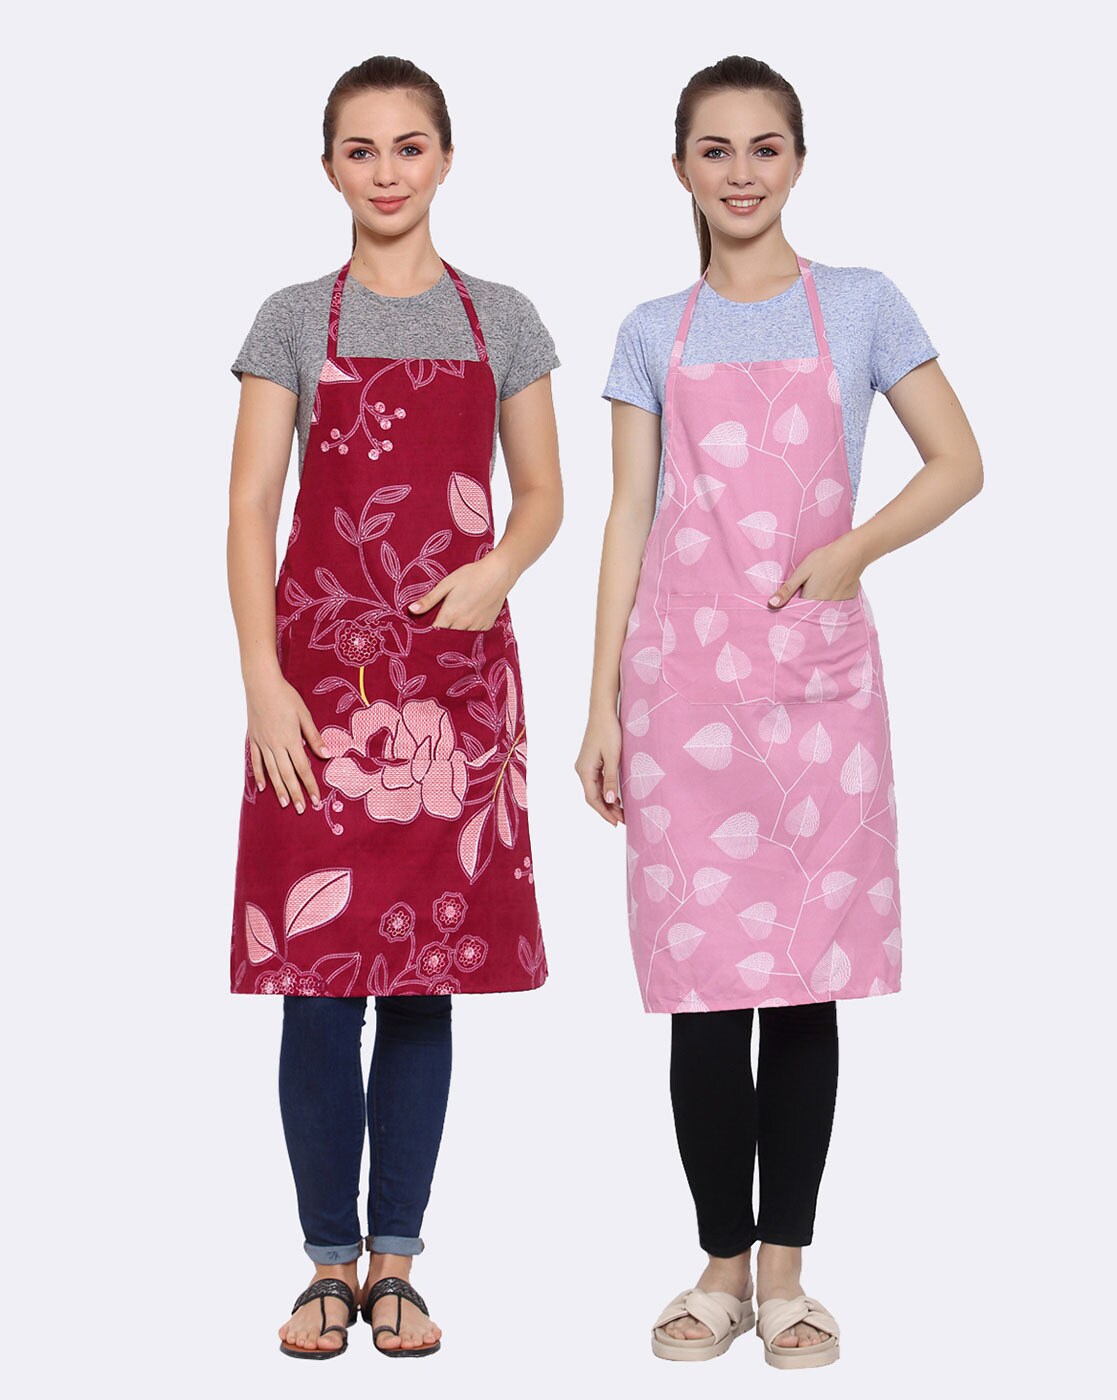 KD Kitchen Chef Apron - The Peppermill